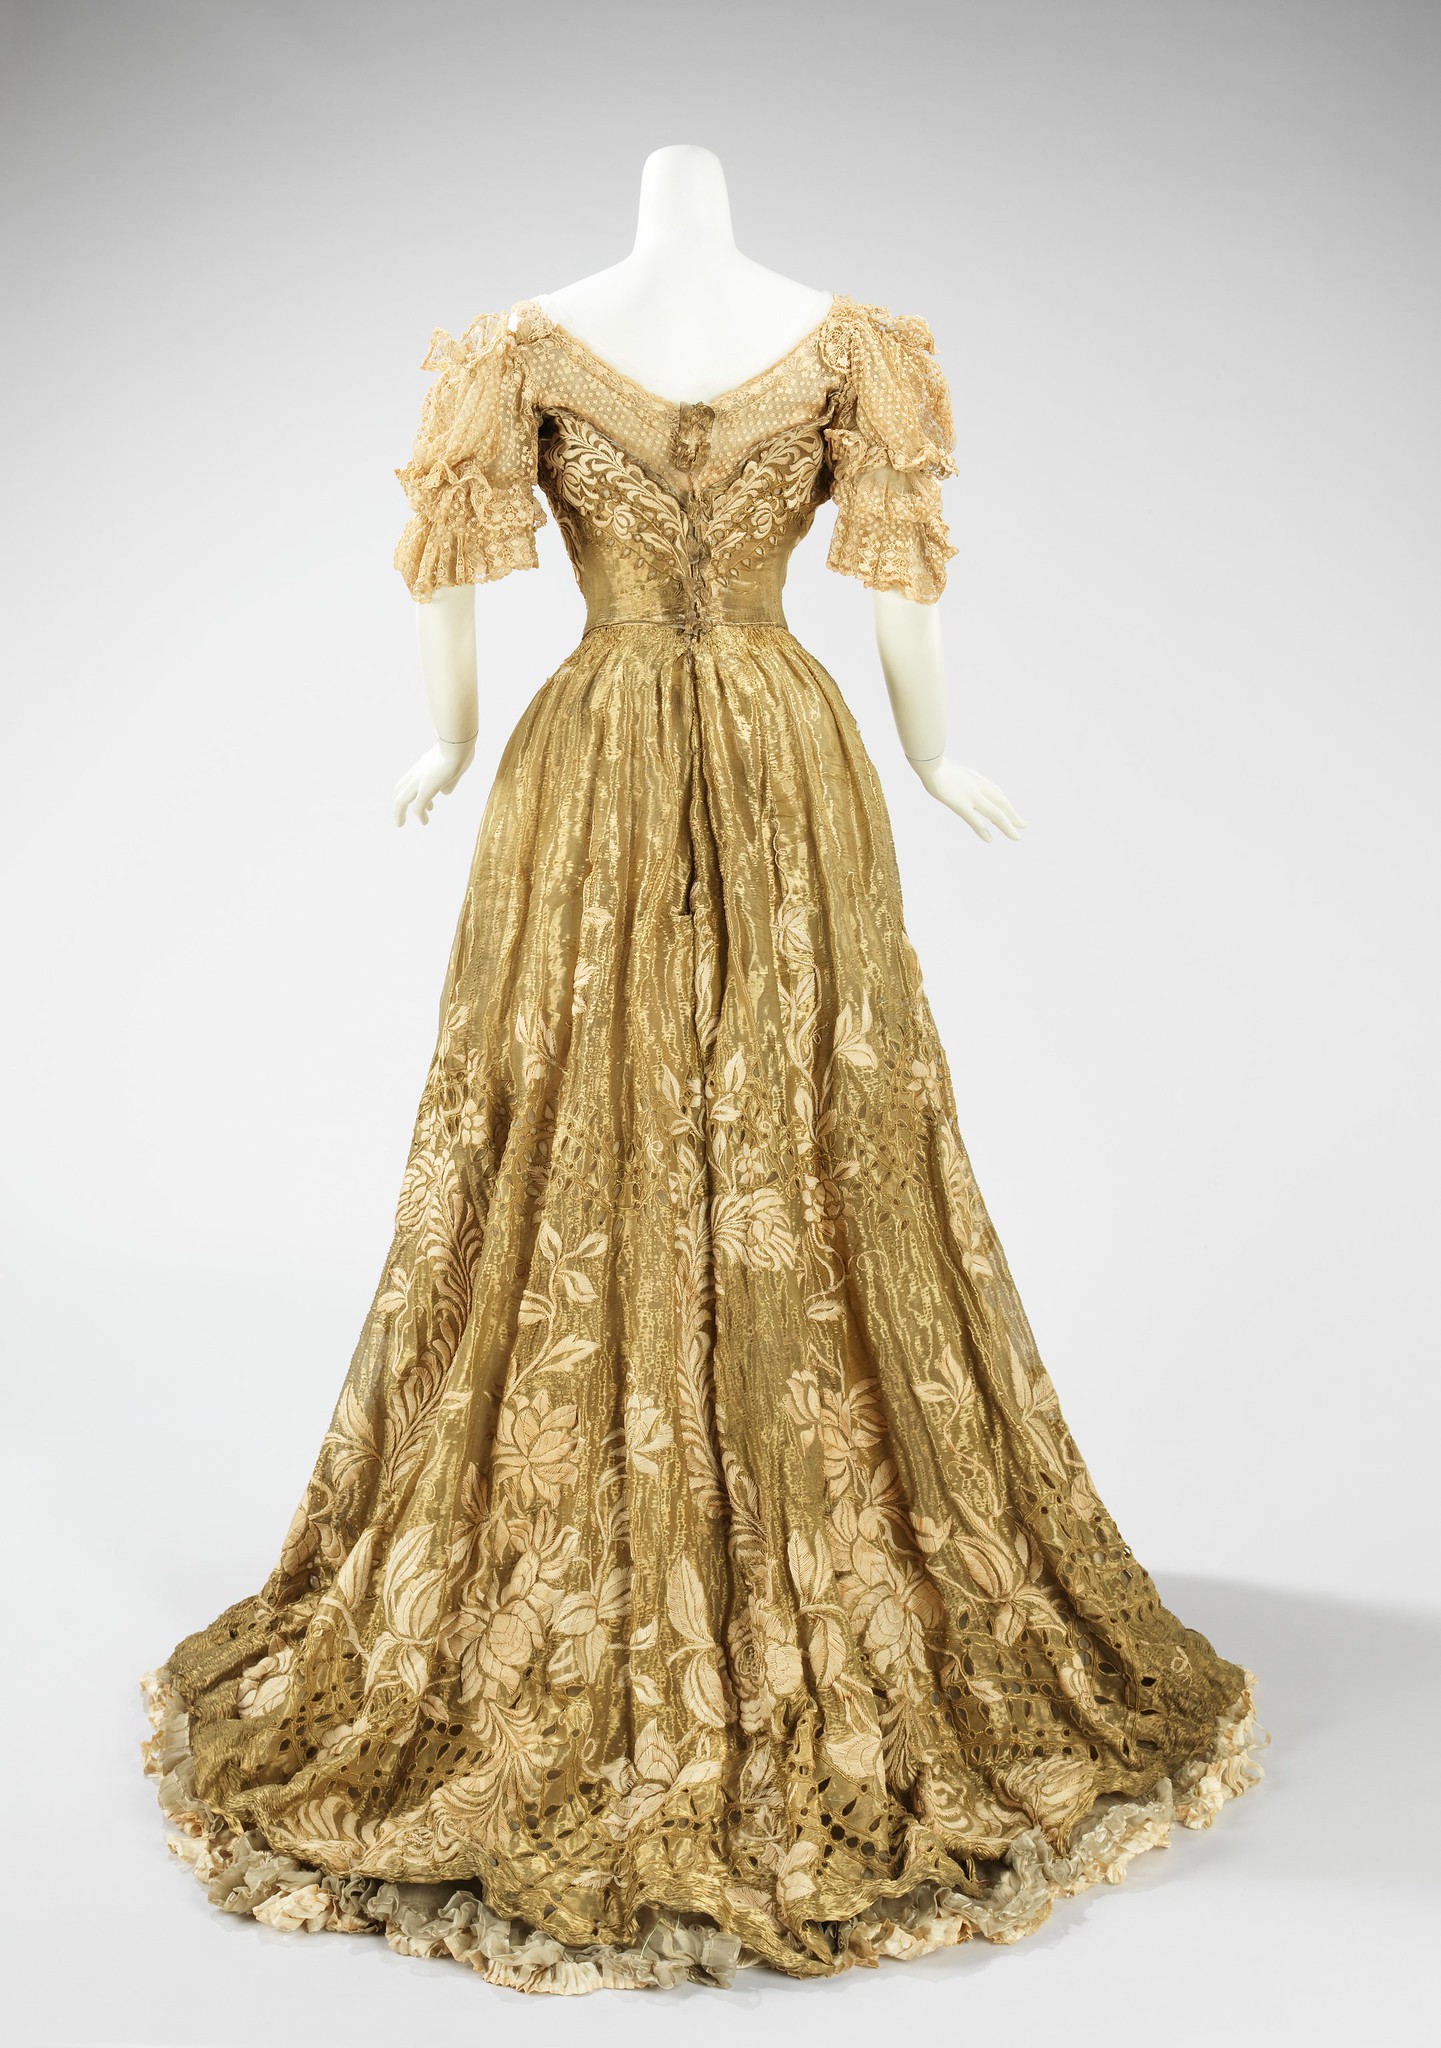 1898 Ball gown. French. Jacques Doucet. Silk, metal, linen. metmuseum